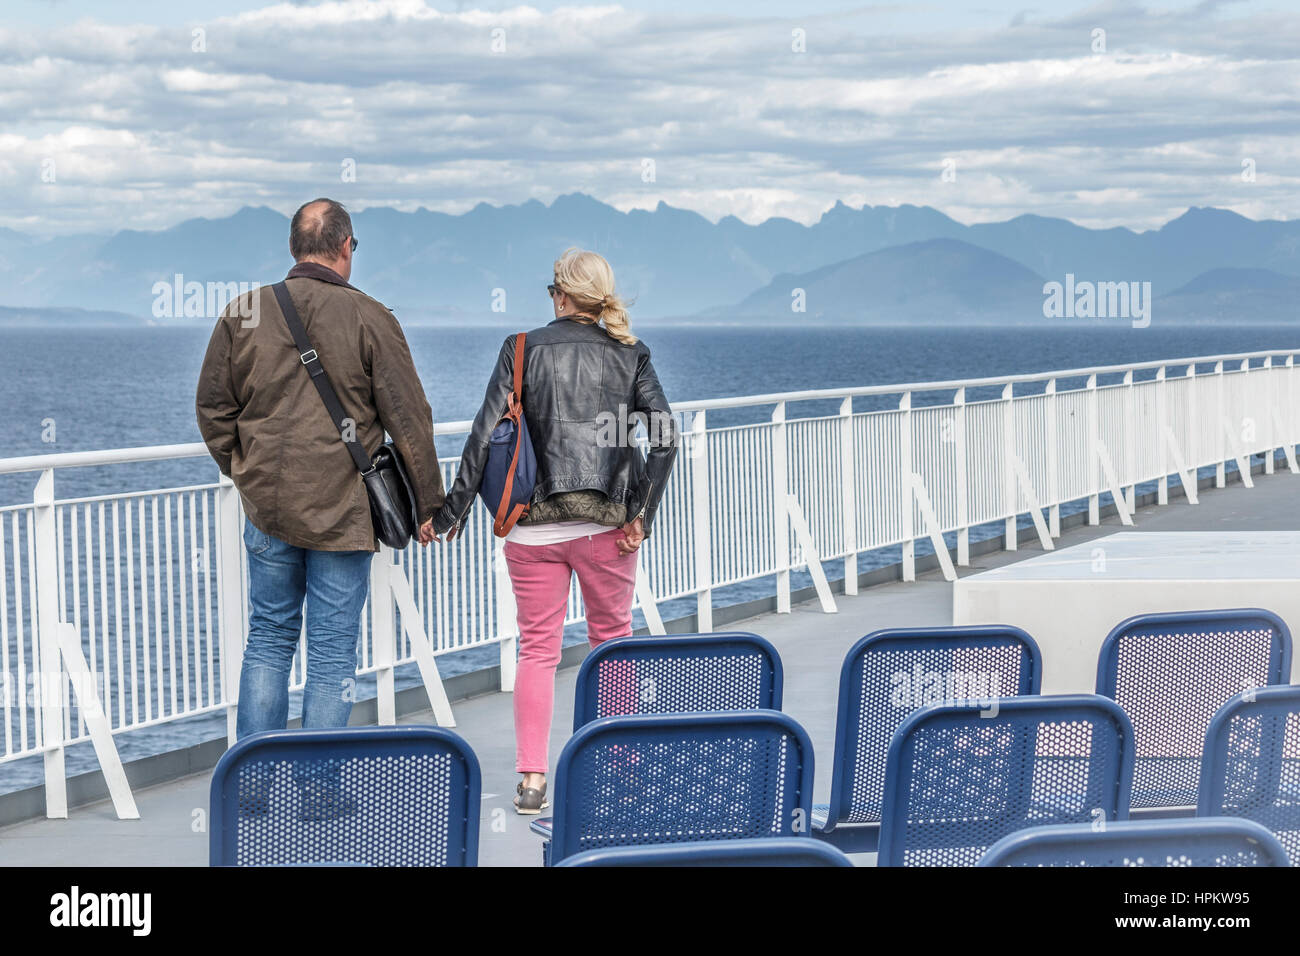 A couple, alone on the deck of a ferry, hold hands and look across the Strait of Georgia to Bowen Island, Howe Sound and BC's Coast Mountain Range. Stock Photo